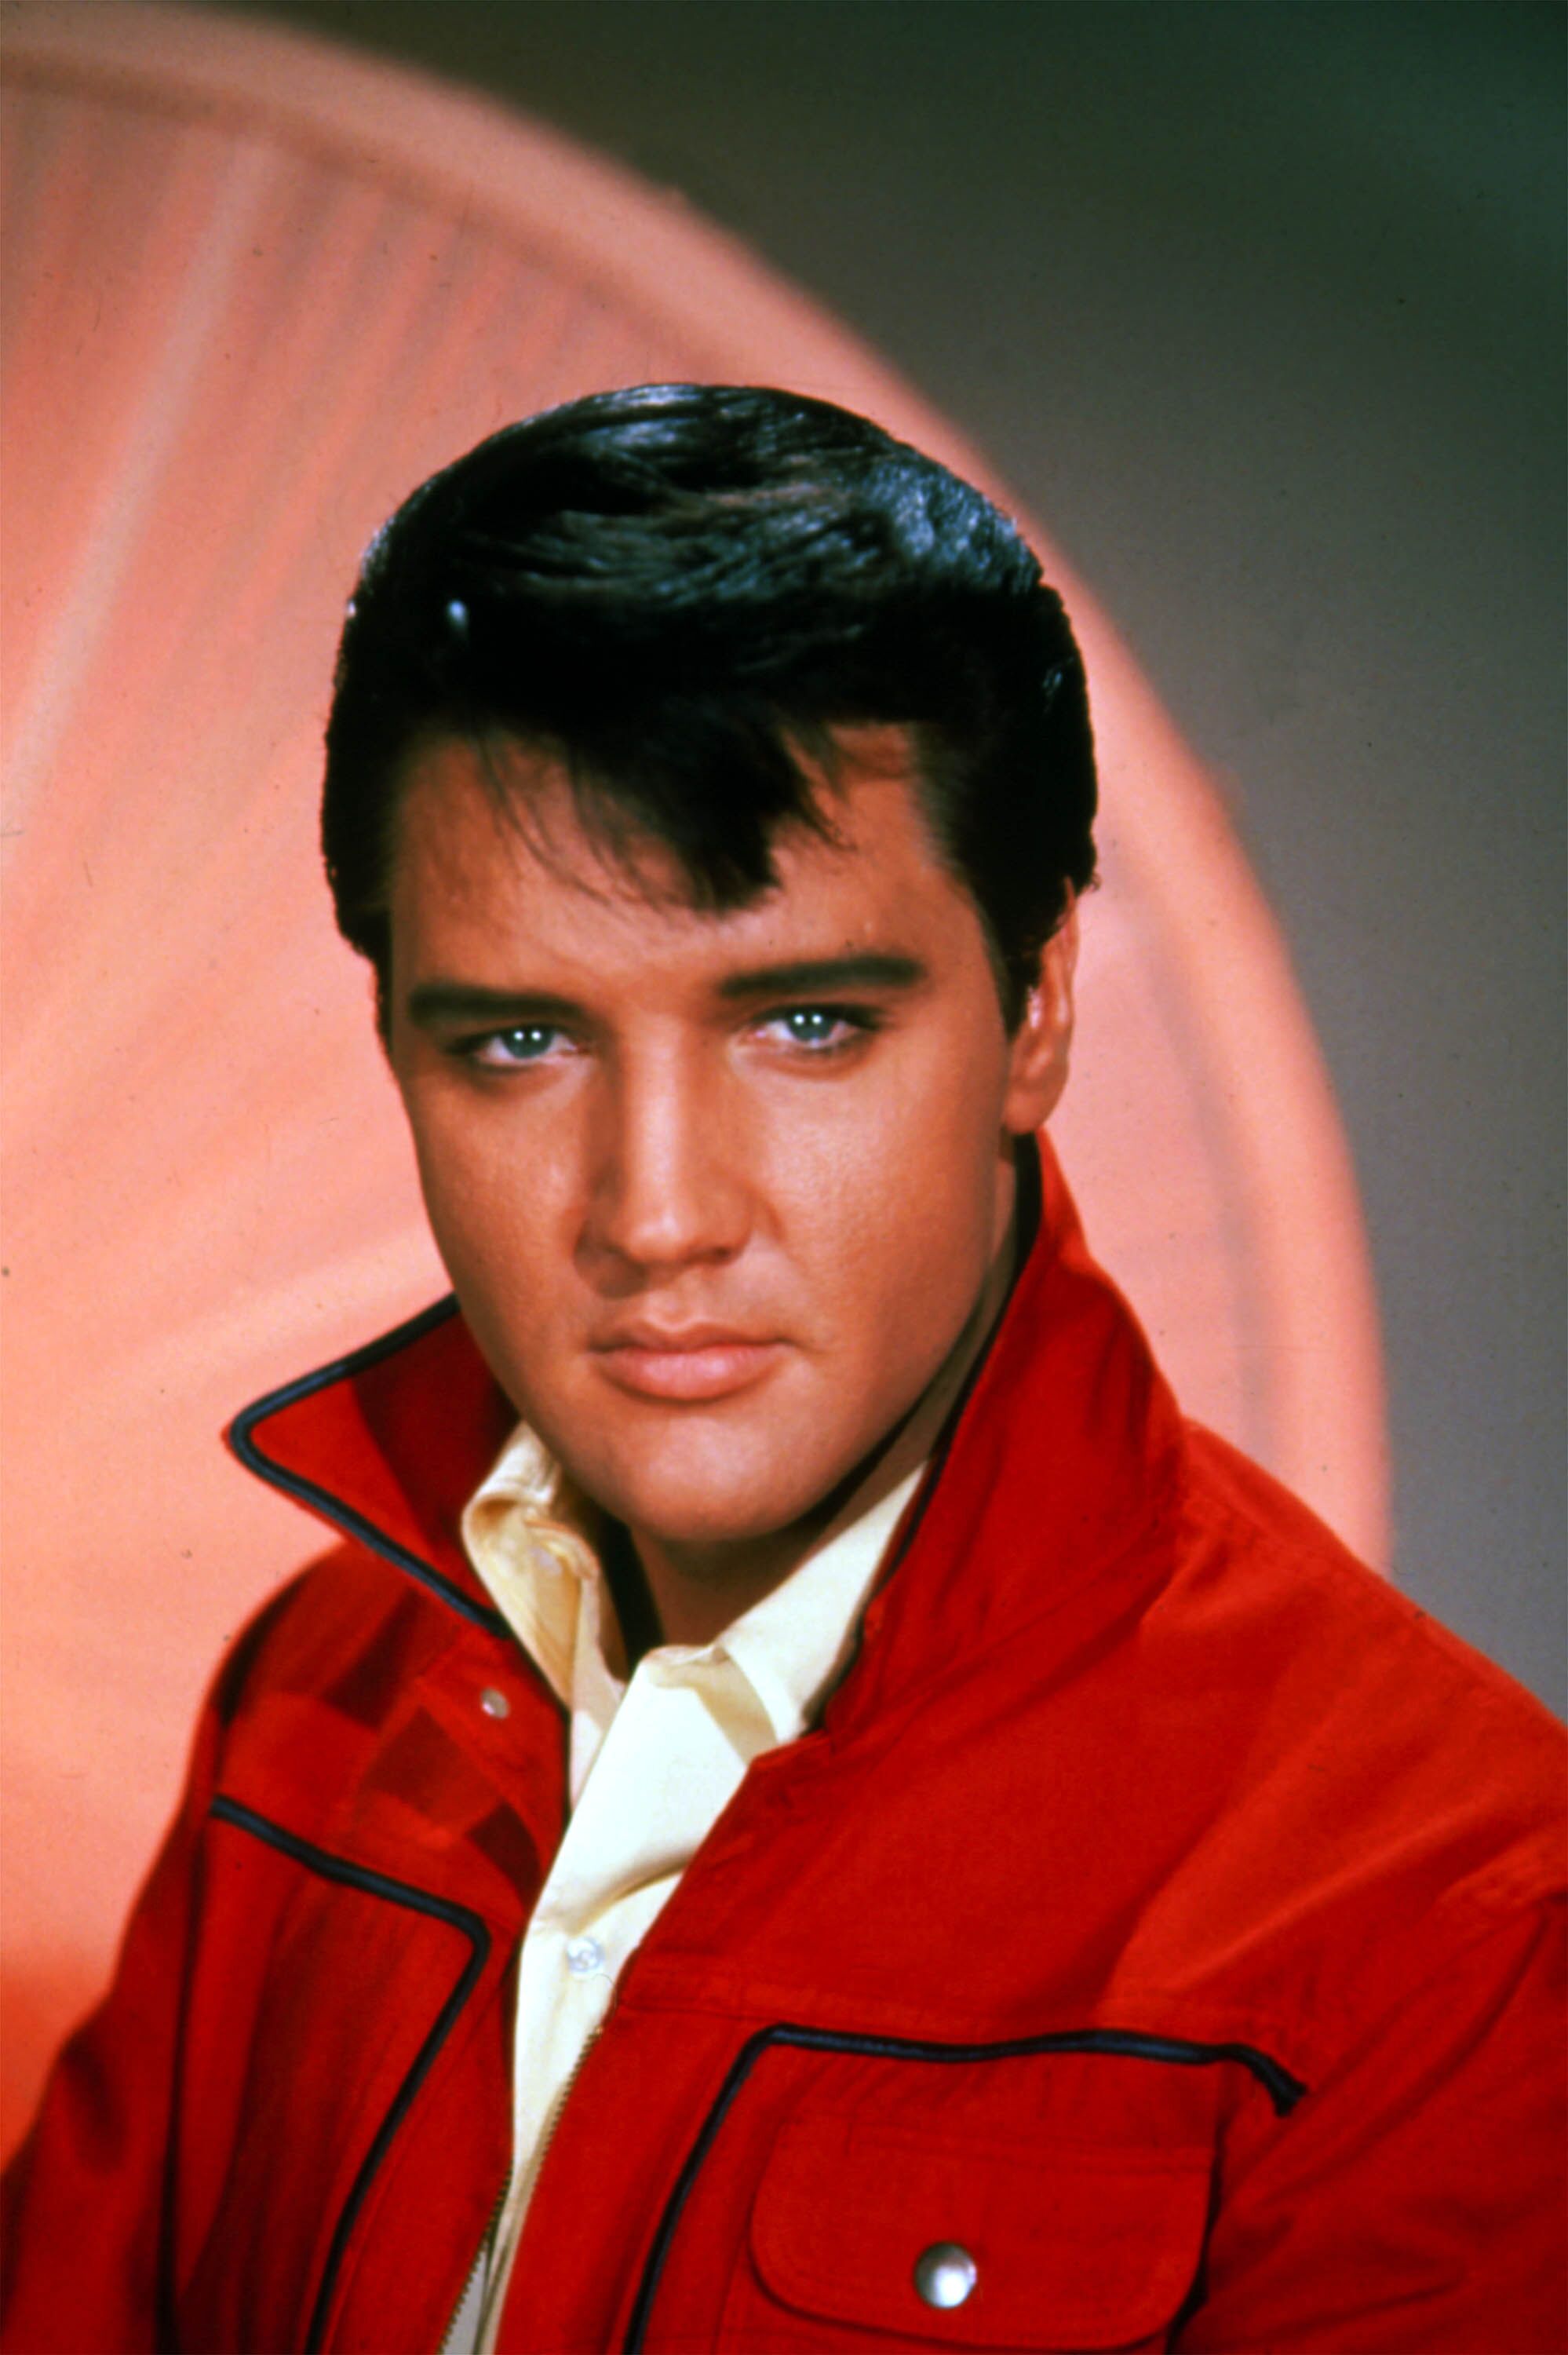 Late singer Elvis Presley poses for a studio portrait. | Photo: Getty Images